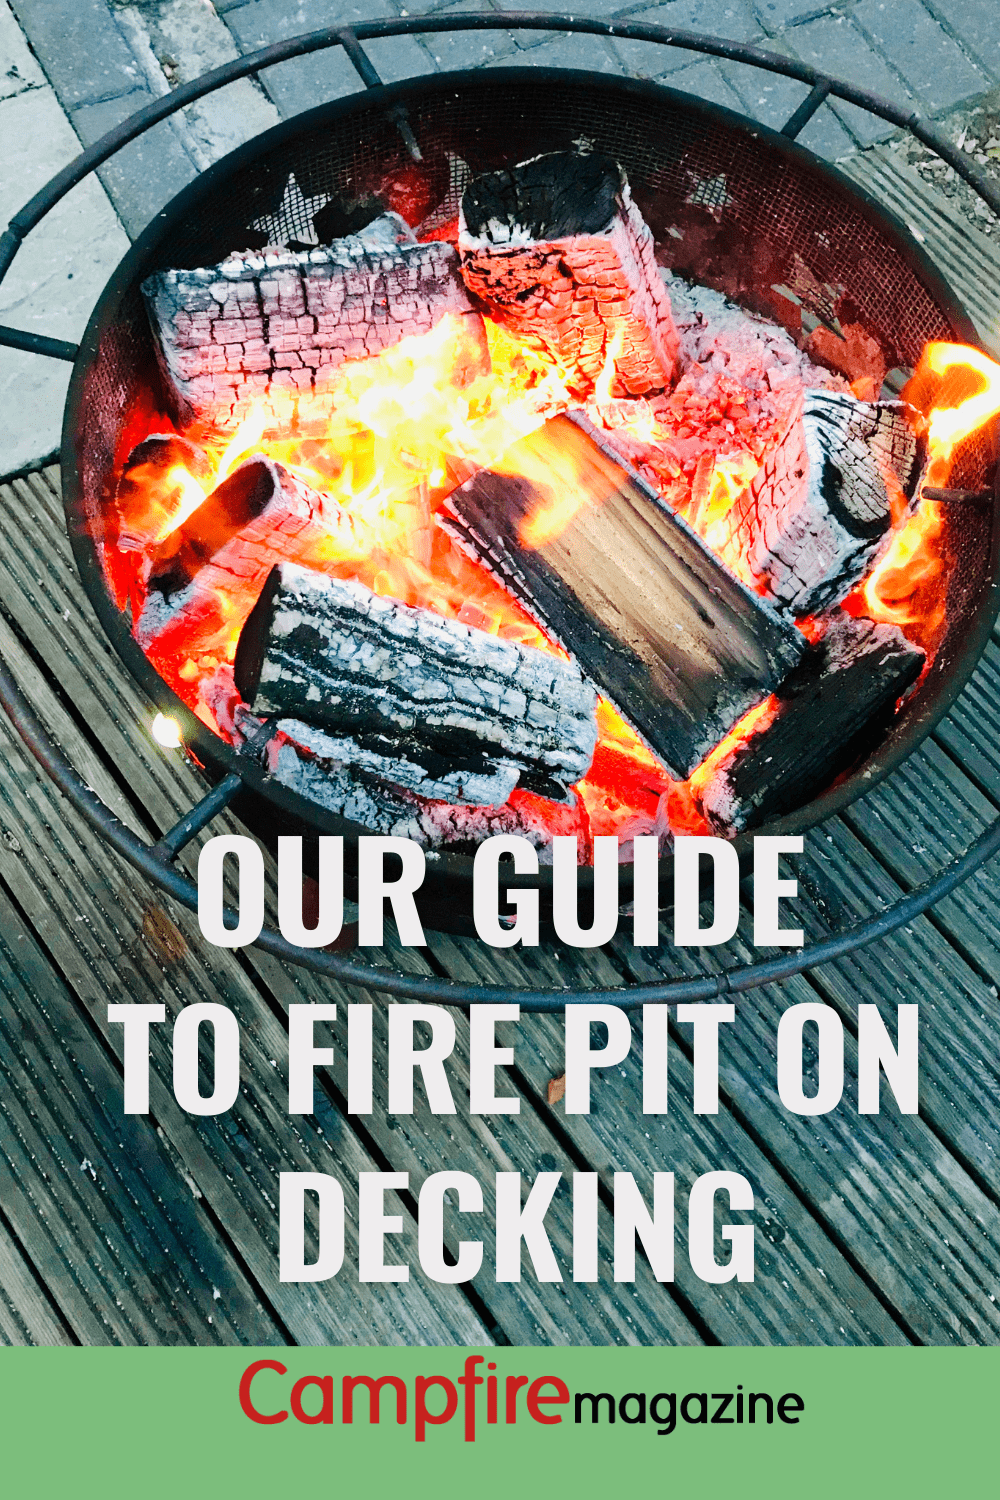 Our Guide To Have A Fire Pit On Decking, How To Protect Deck From Fire Pit